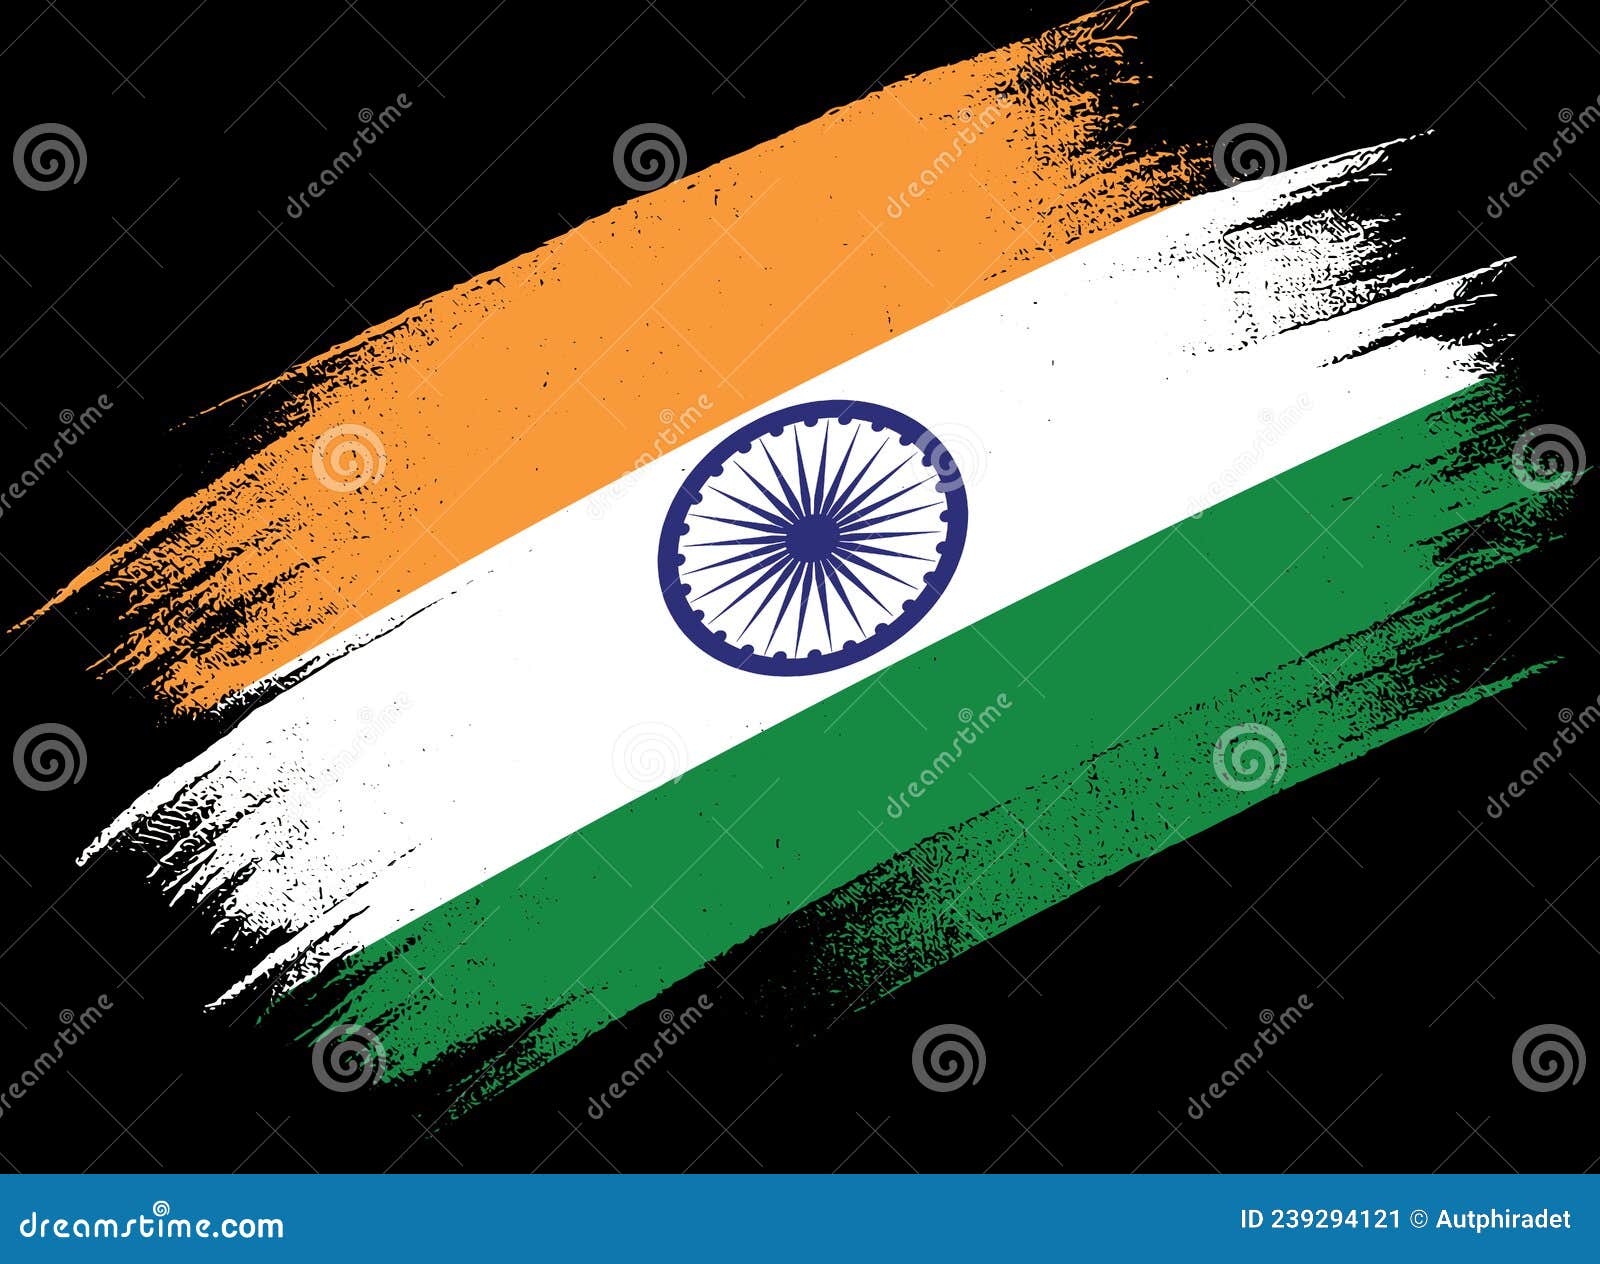 India Flag with Brush Paint Textured Isolated on Png or Transparent  Background,Symbol of India,template for Banner,promote, Stock Vector -  Illustration of background, abstract: 239294121